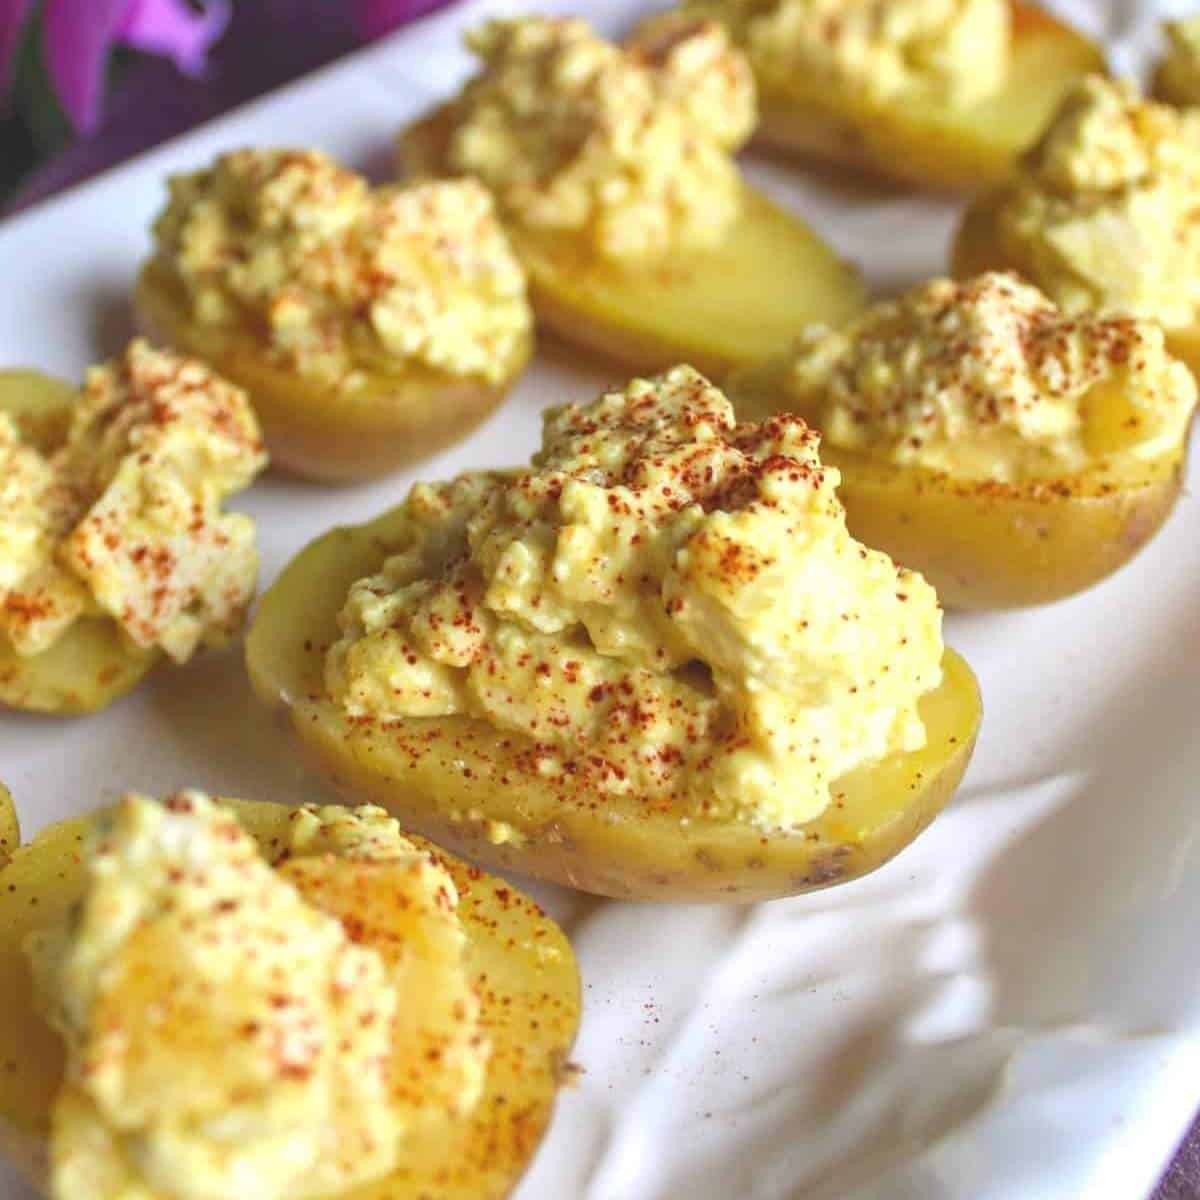 potatoes cut in half and filled with vegan egg salad.